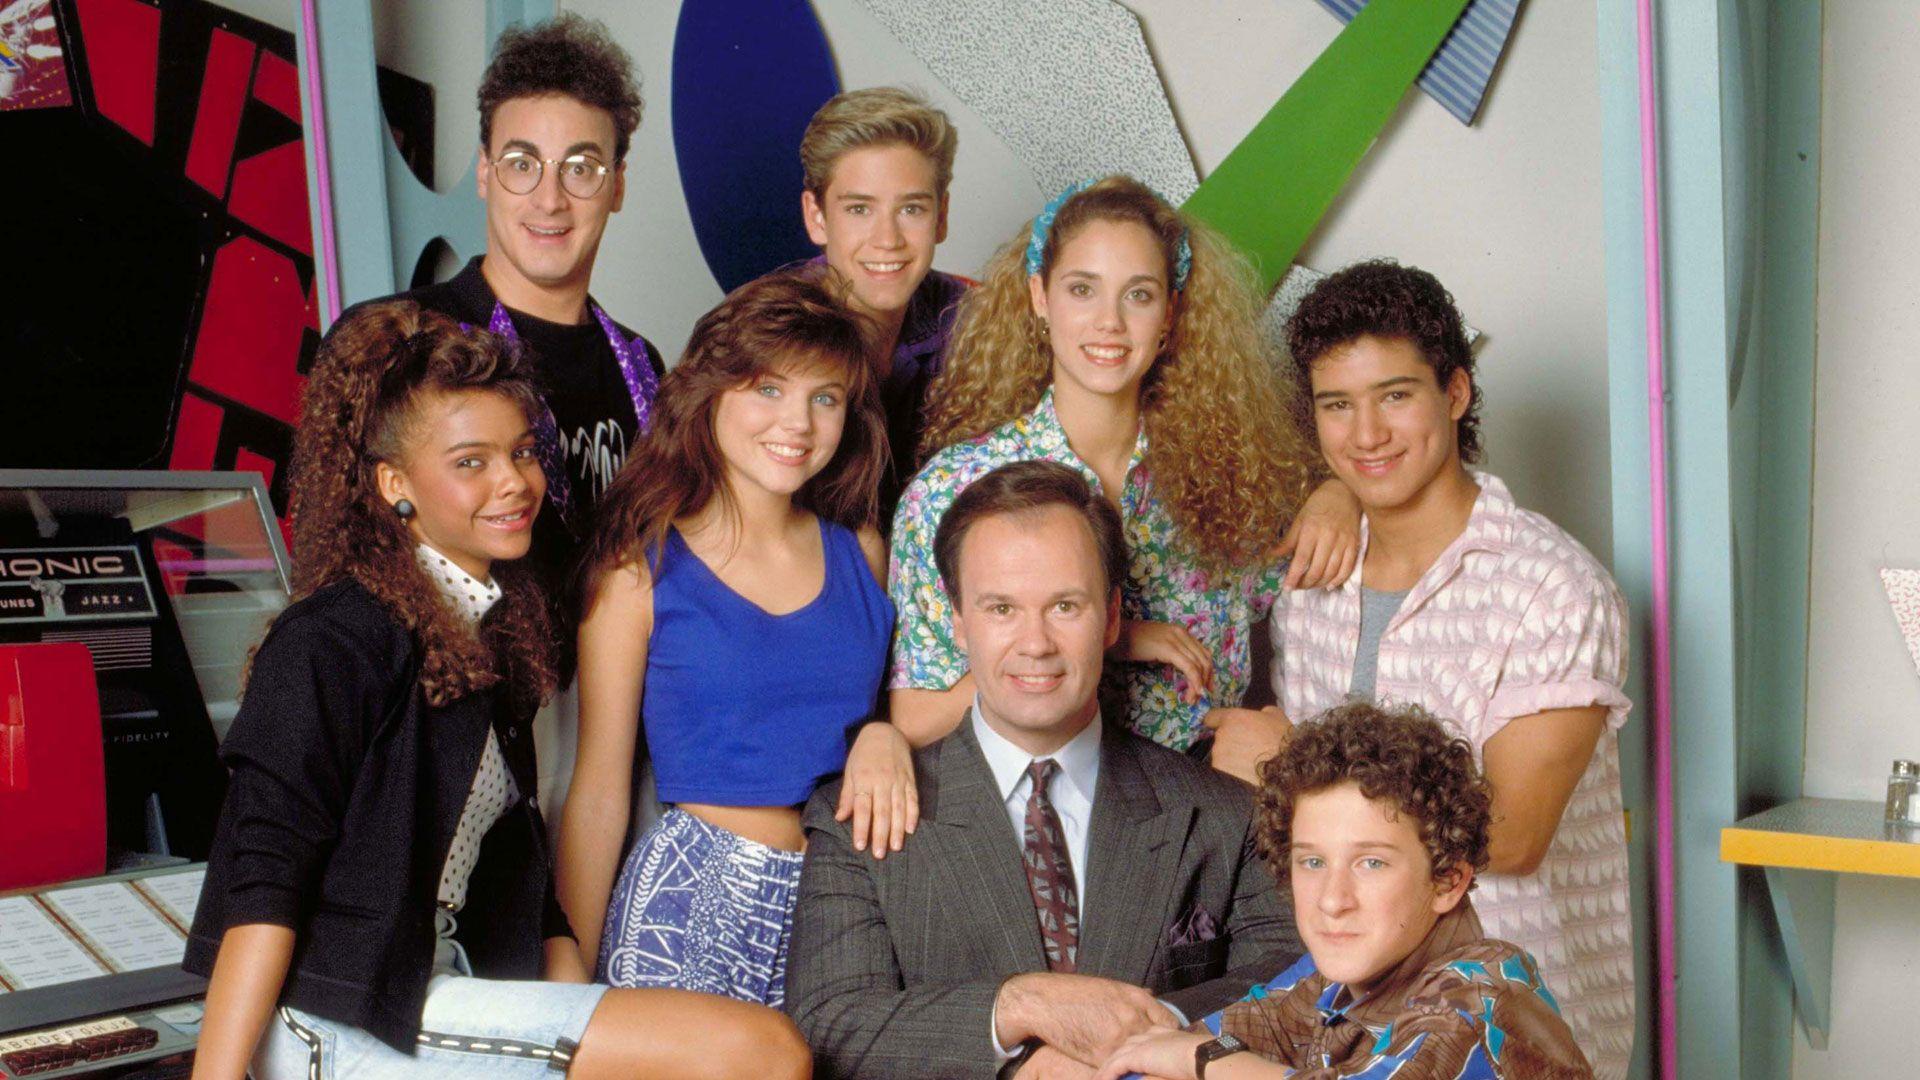 Saved by the Bell' Movie to Air on Lifetime